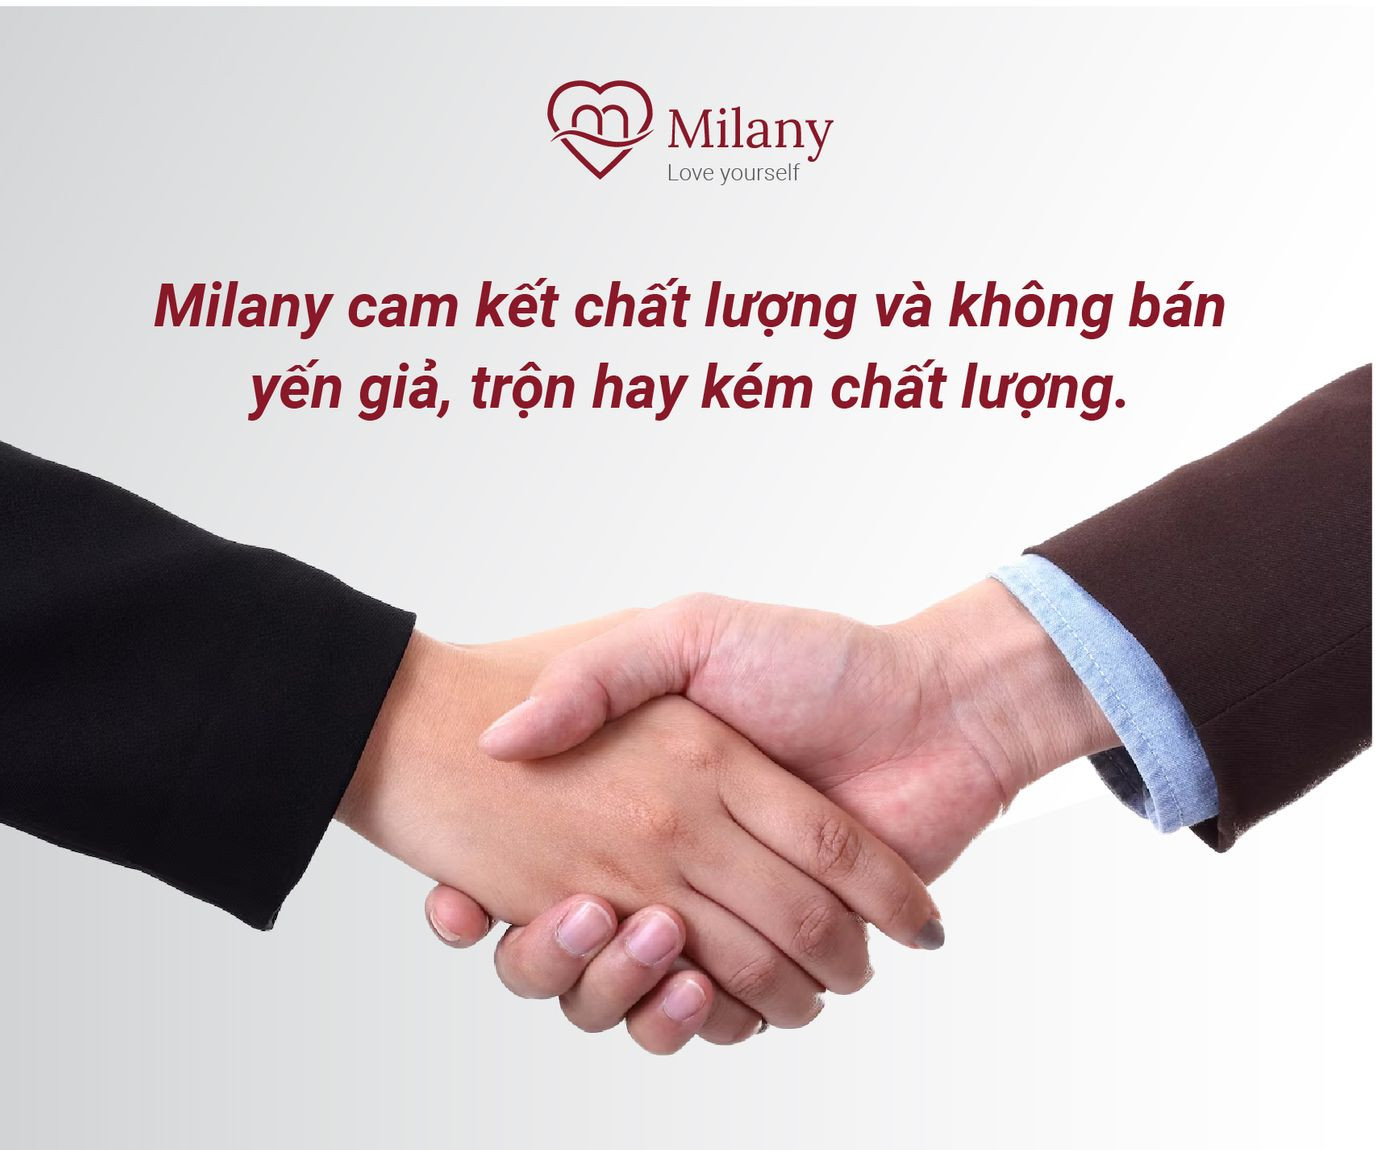 milany cam ket chat luong